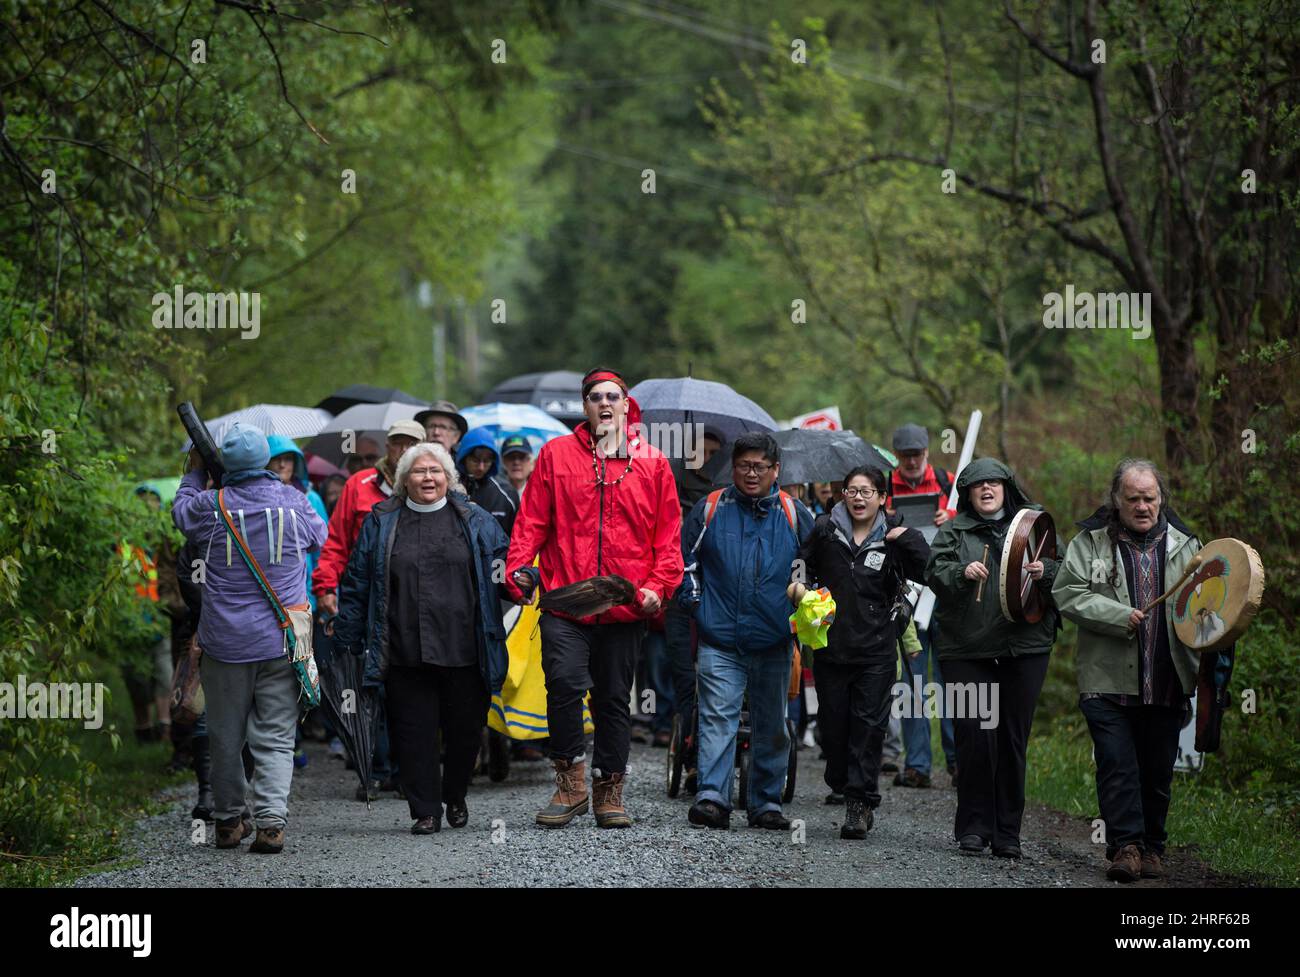 Vivian Seegers, second left, a transitional deacon in the Anglican Church, who is Cree and Chipewyan, and Cedar George-Parker, third left, lead religious leaders and more than 100 members of diverse faith communities to a gate at Kinder Morgan's facility in Burnaby, B.C., to protest the company's Trans Mountain pipeline expansion, on Saturday April 28, 2018. THE CANADIAN PRESS/Darryl Dyck Stock Photo